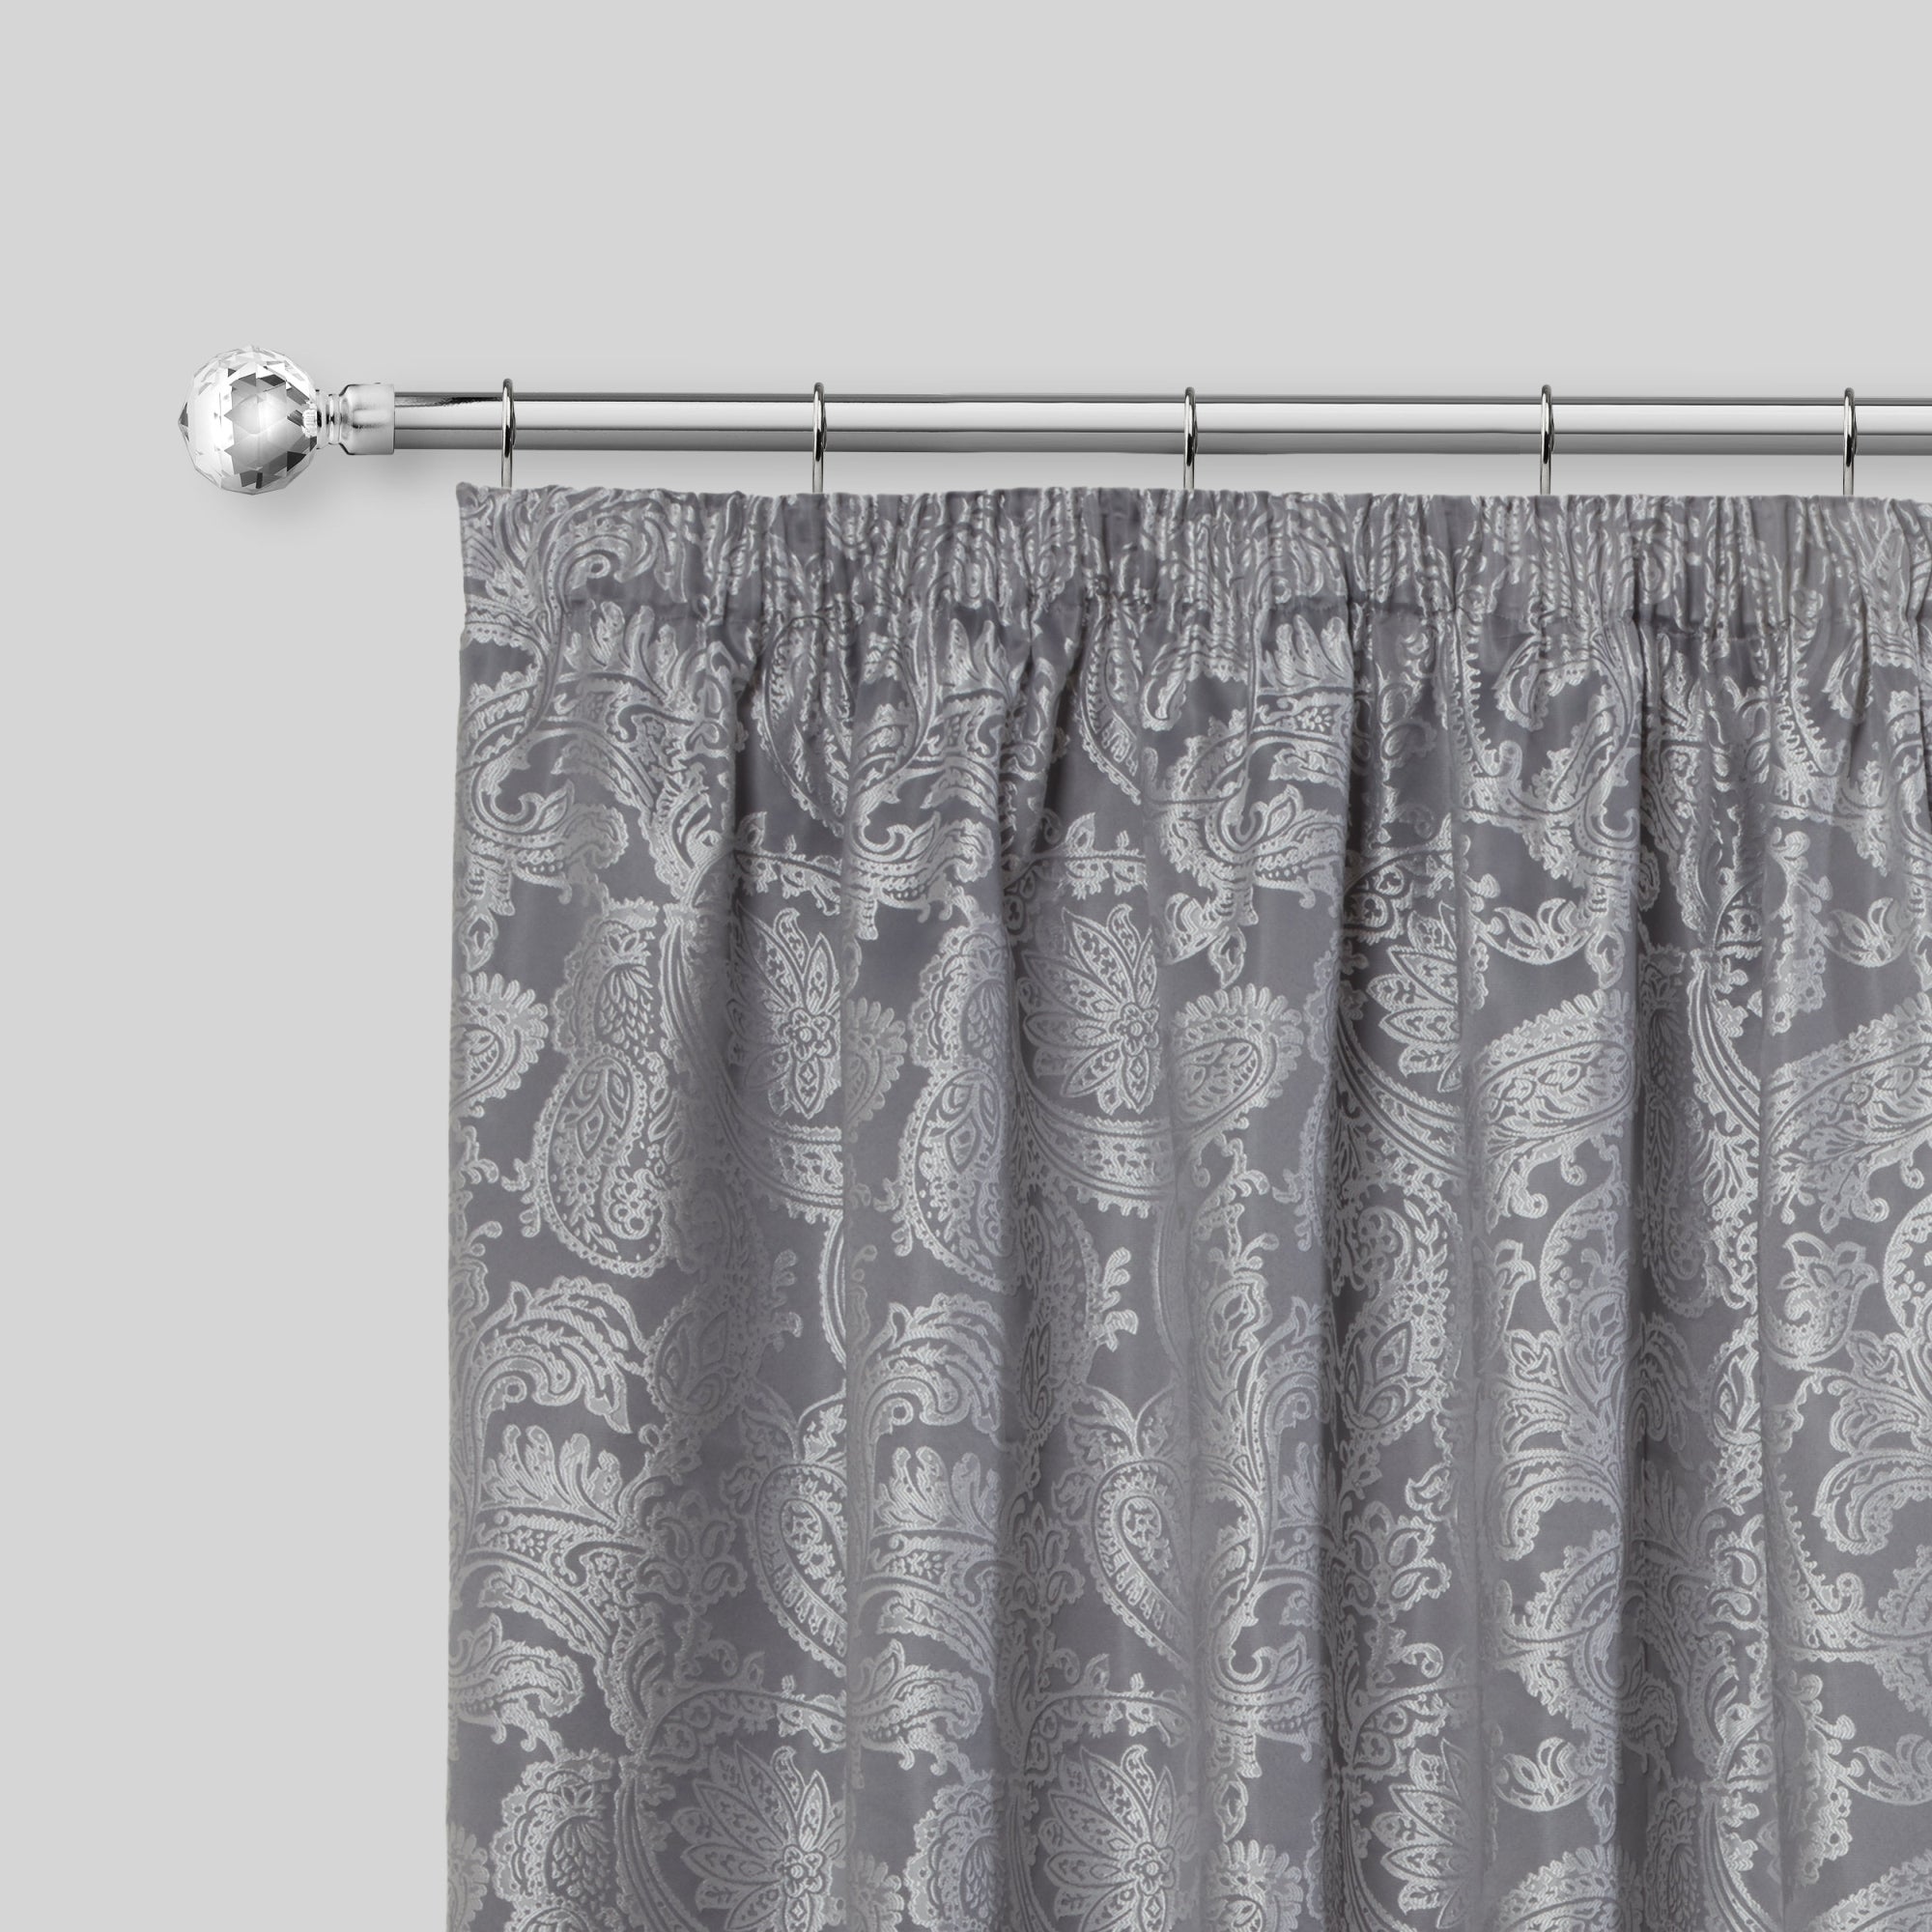 Crystal - Extendable Curtain Pole with Rings and Pair of End Finials in Chrome - 1.6 - 3m